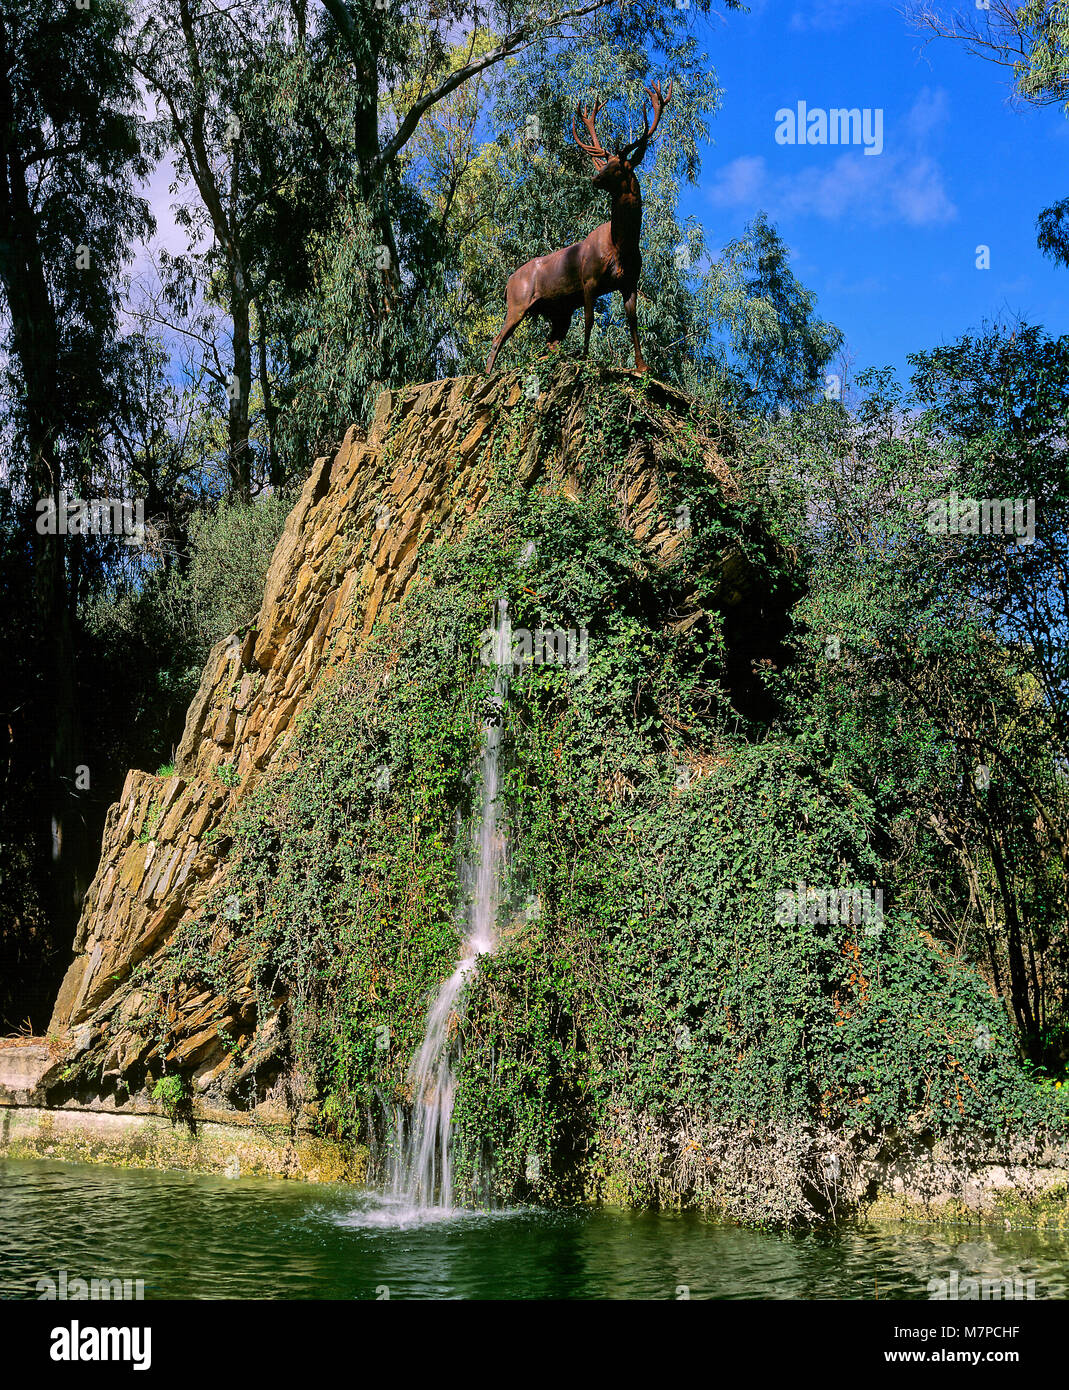 Palace and gardens of Moratalla (year 1918), Fountain and pond of the Venado (Deer) sculpture by Mariano Benlliure, Gardens designed by the French eng Stock Photo